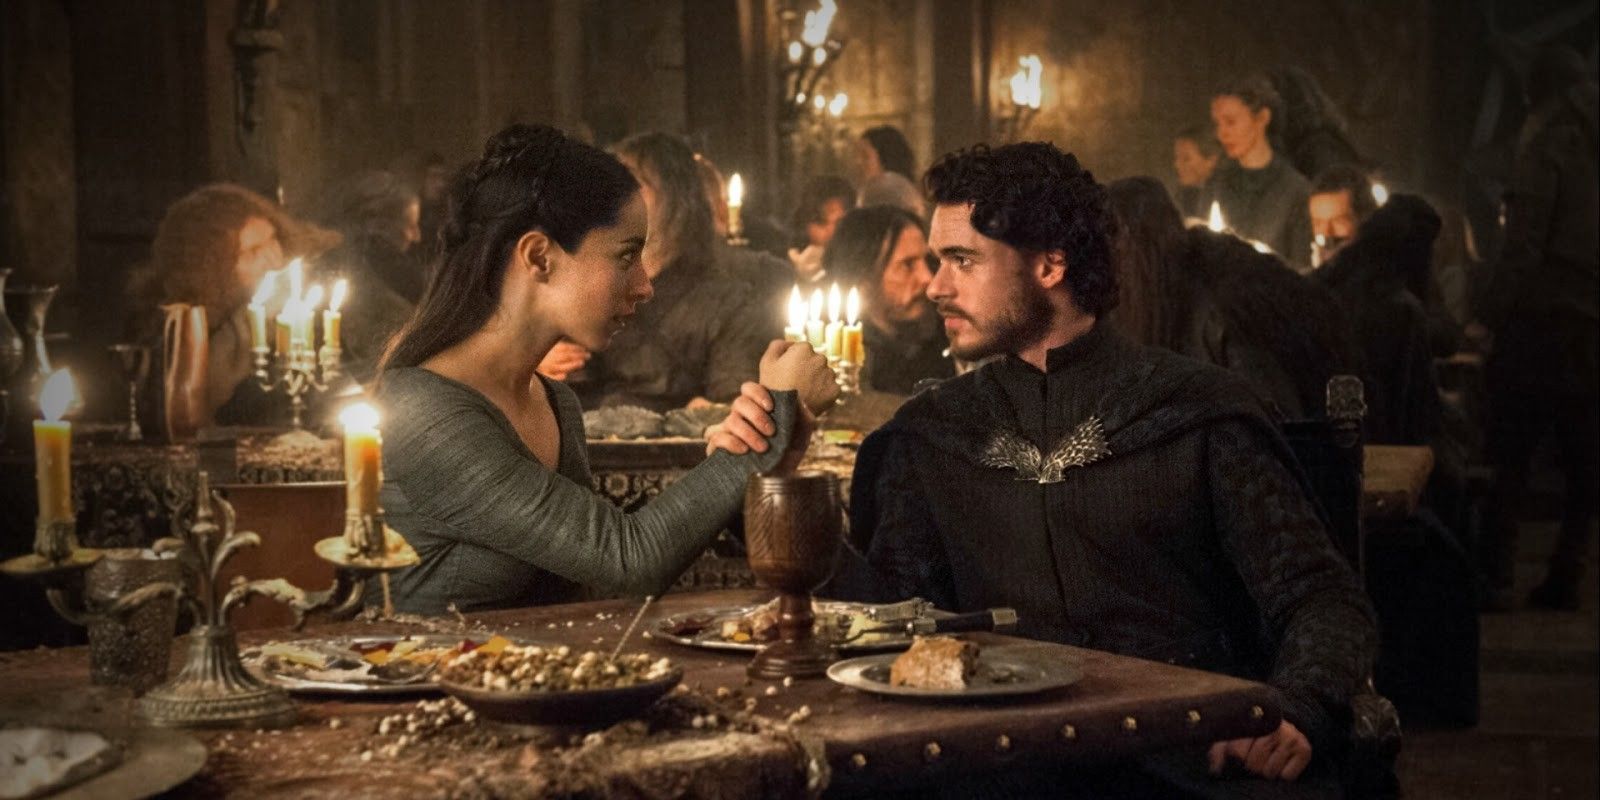 Oona Chaplin as Talisa and Richard Madden as Robb Stark in Game of Thrones